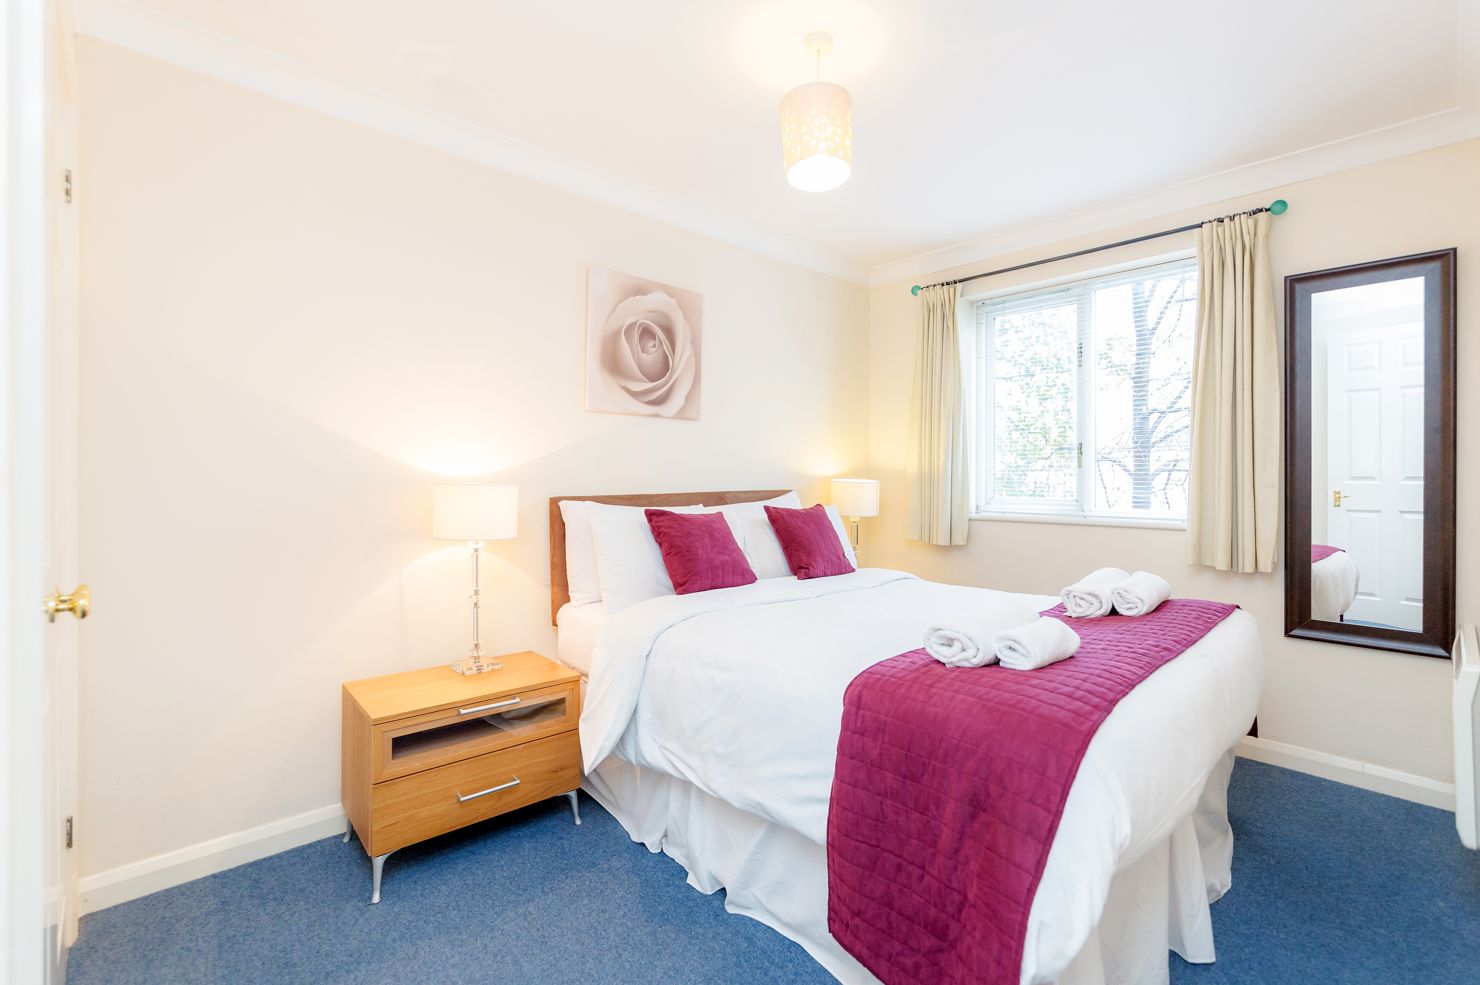 Looking-for-affordable-accommodation-in-Surrey?-why-not-book-our-lovely-Kingston-Corporate-Apartments-at-Regents-Court.-Call-today-for-great-rates.